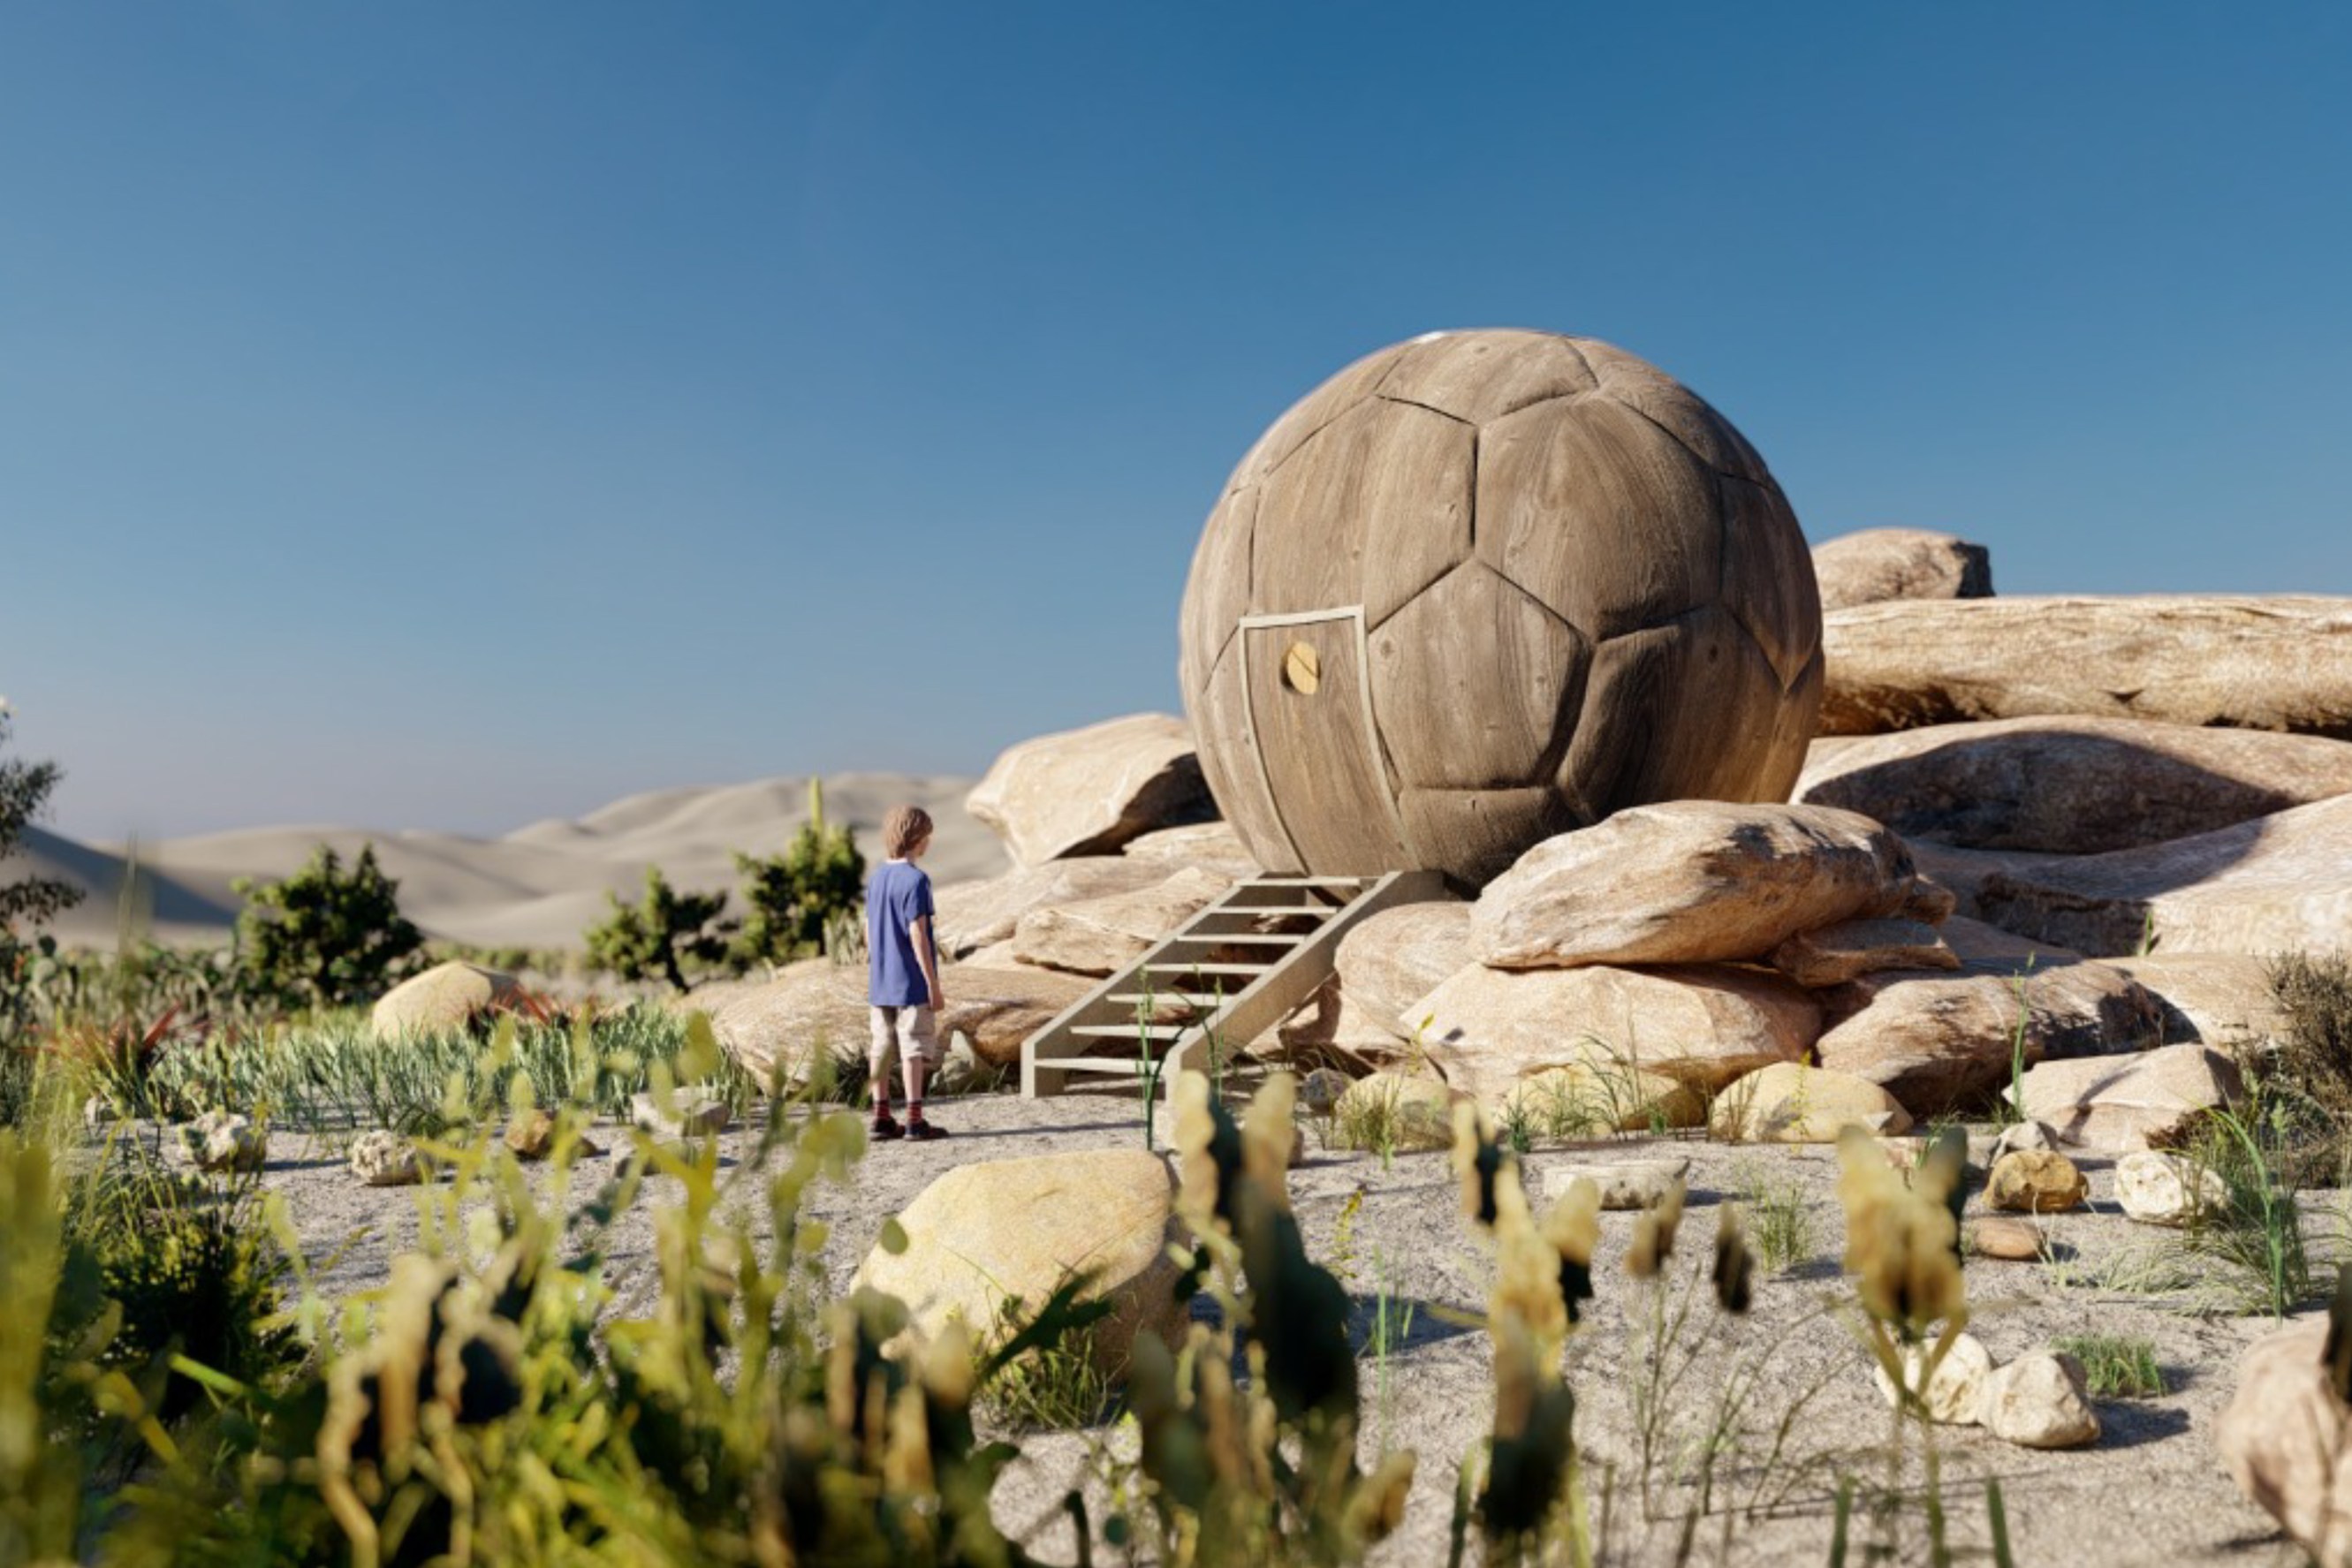 A wooden sphere shaped home nestled in a pile of boulders